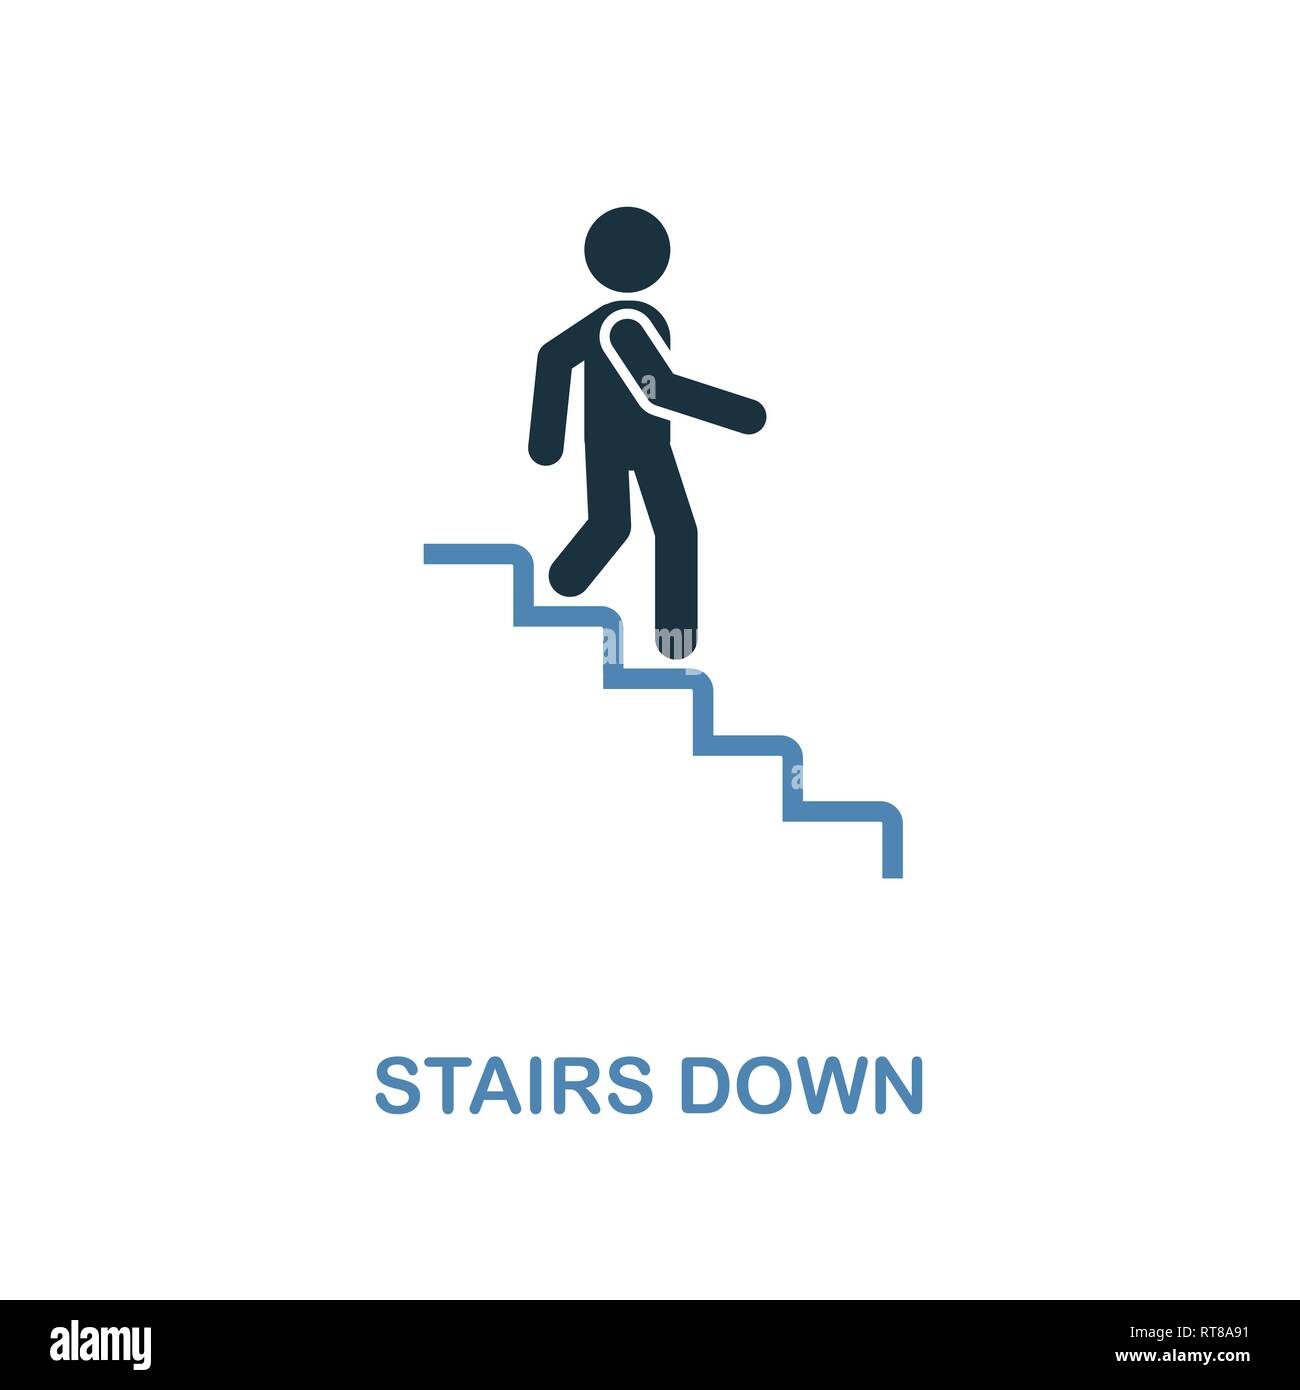 Stairs Down icon. Monochrome style design from shopping center sign icon collection. UI. Pixel perfect simple pictogram stairs down icon. Web design Stock Vector